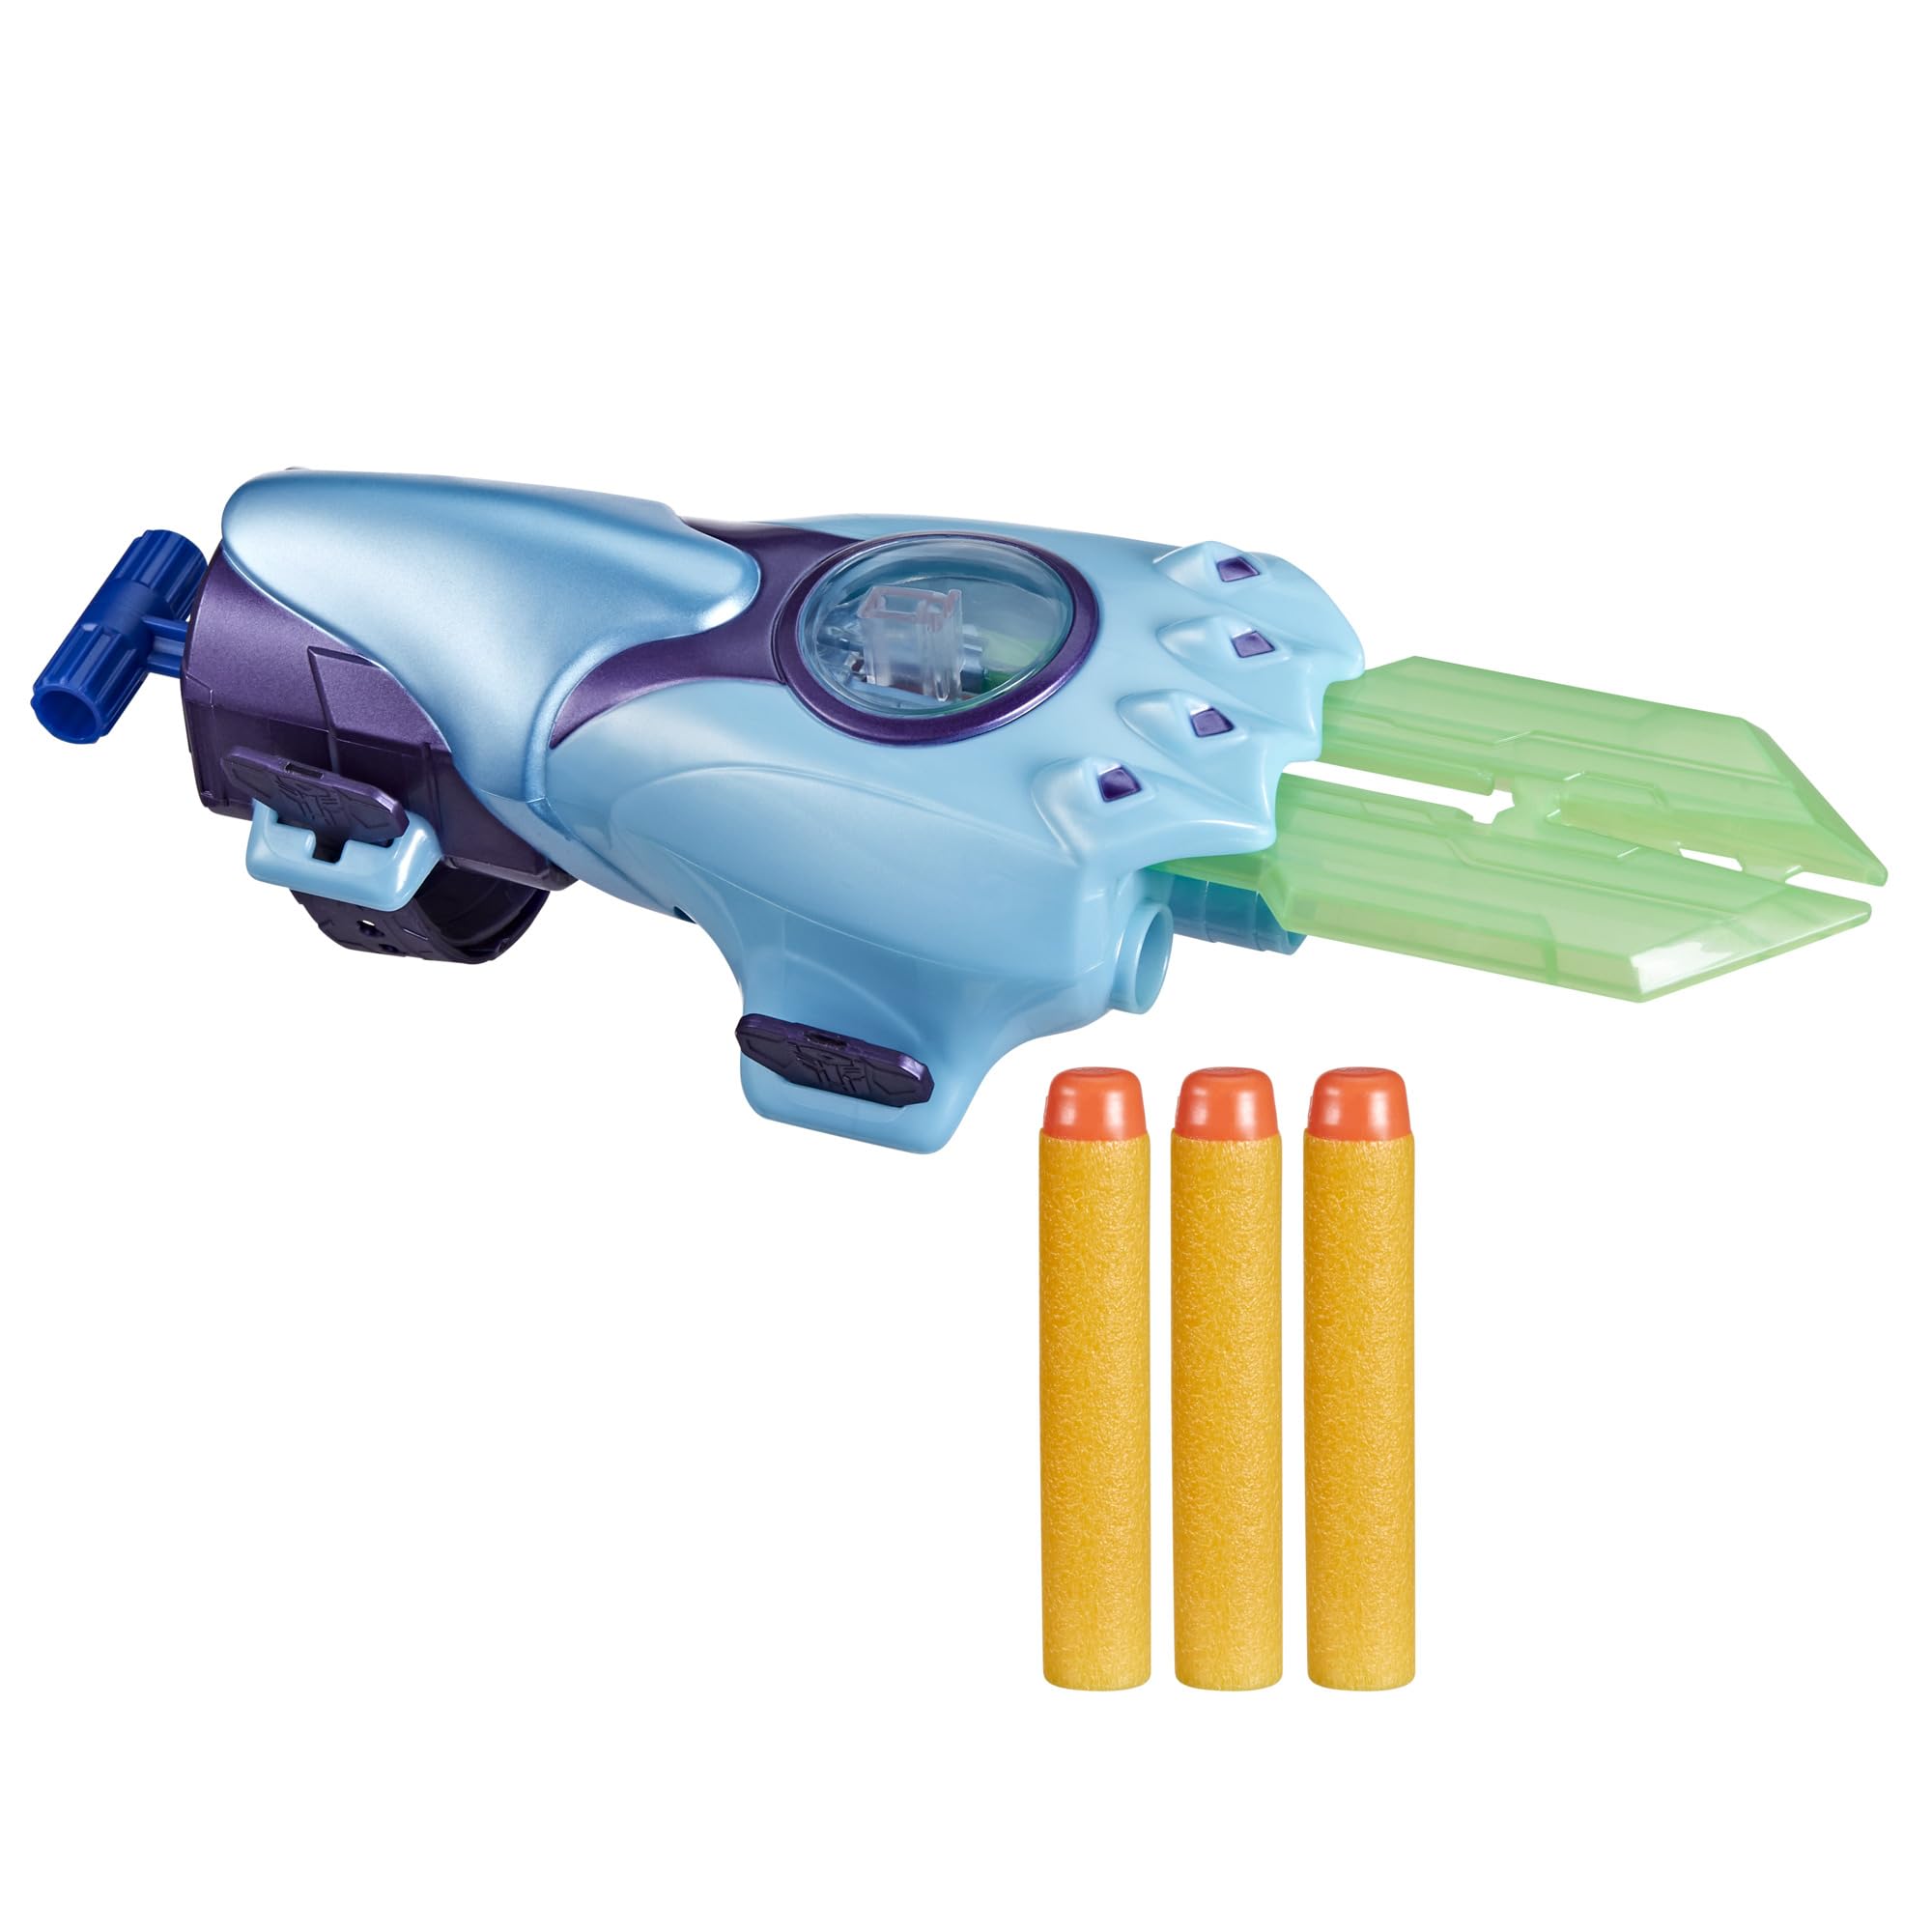 Transformers EarthSpark Cyber-Sleeve Battle Blaster with 3 Nerf Darts and Cyber-Sword, Interactive Role Play Toys for Boys and Girls Ages 6 and Up